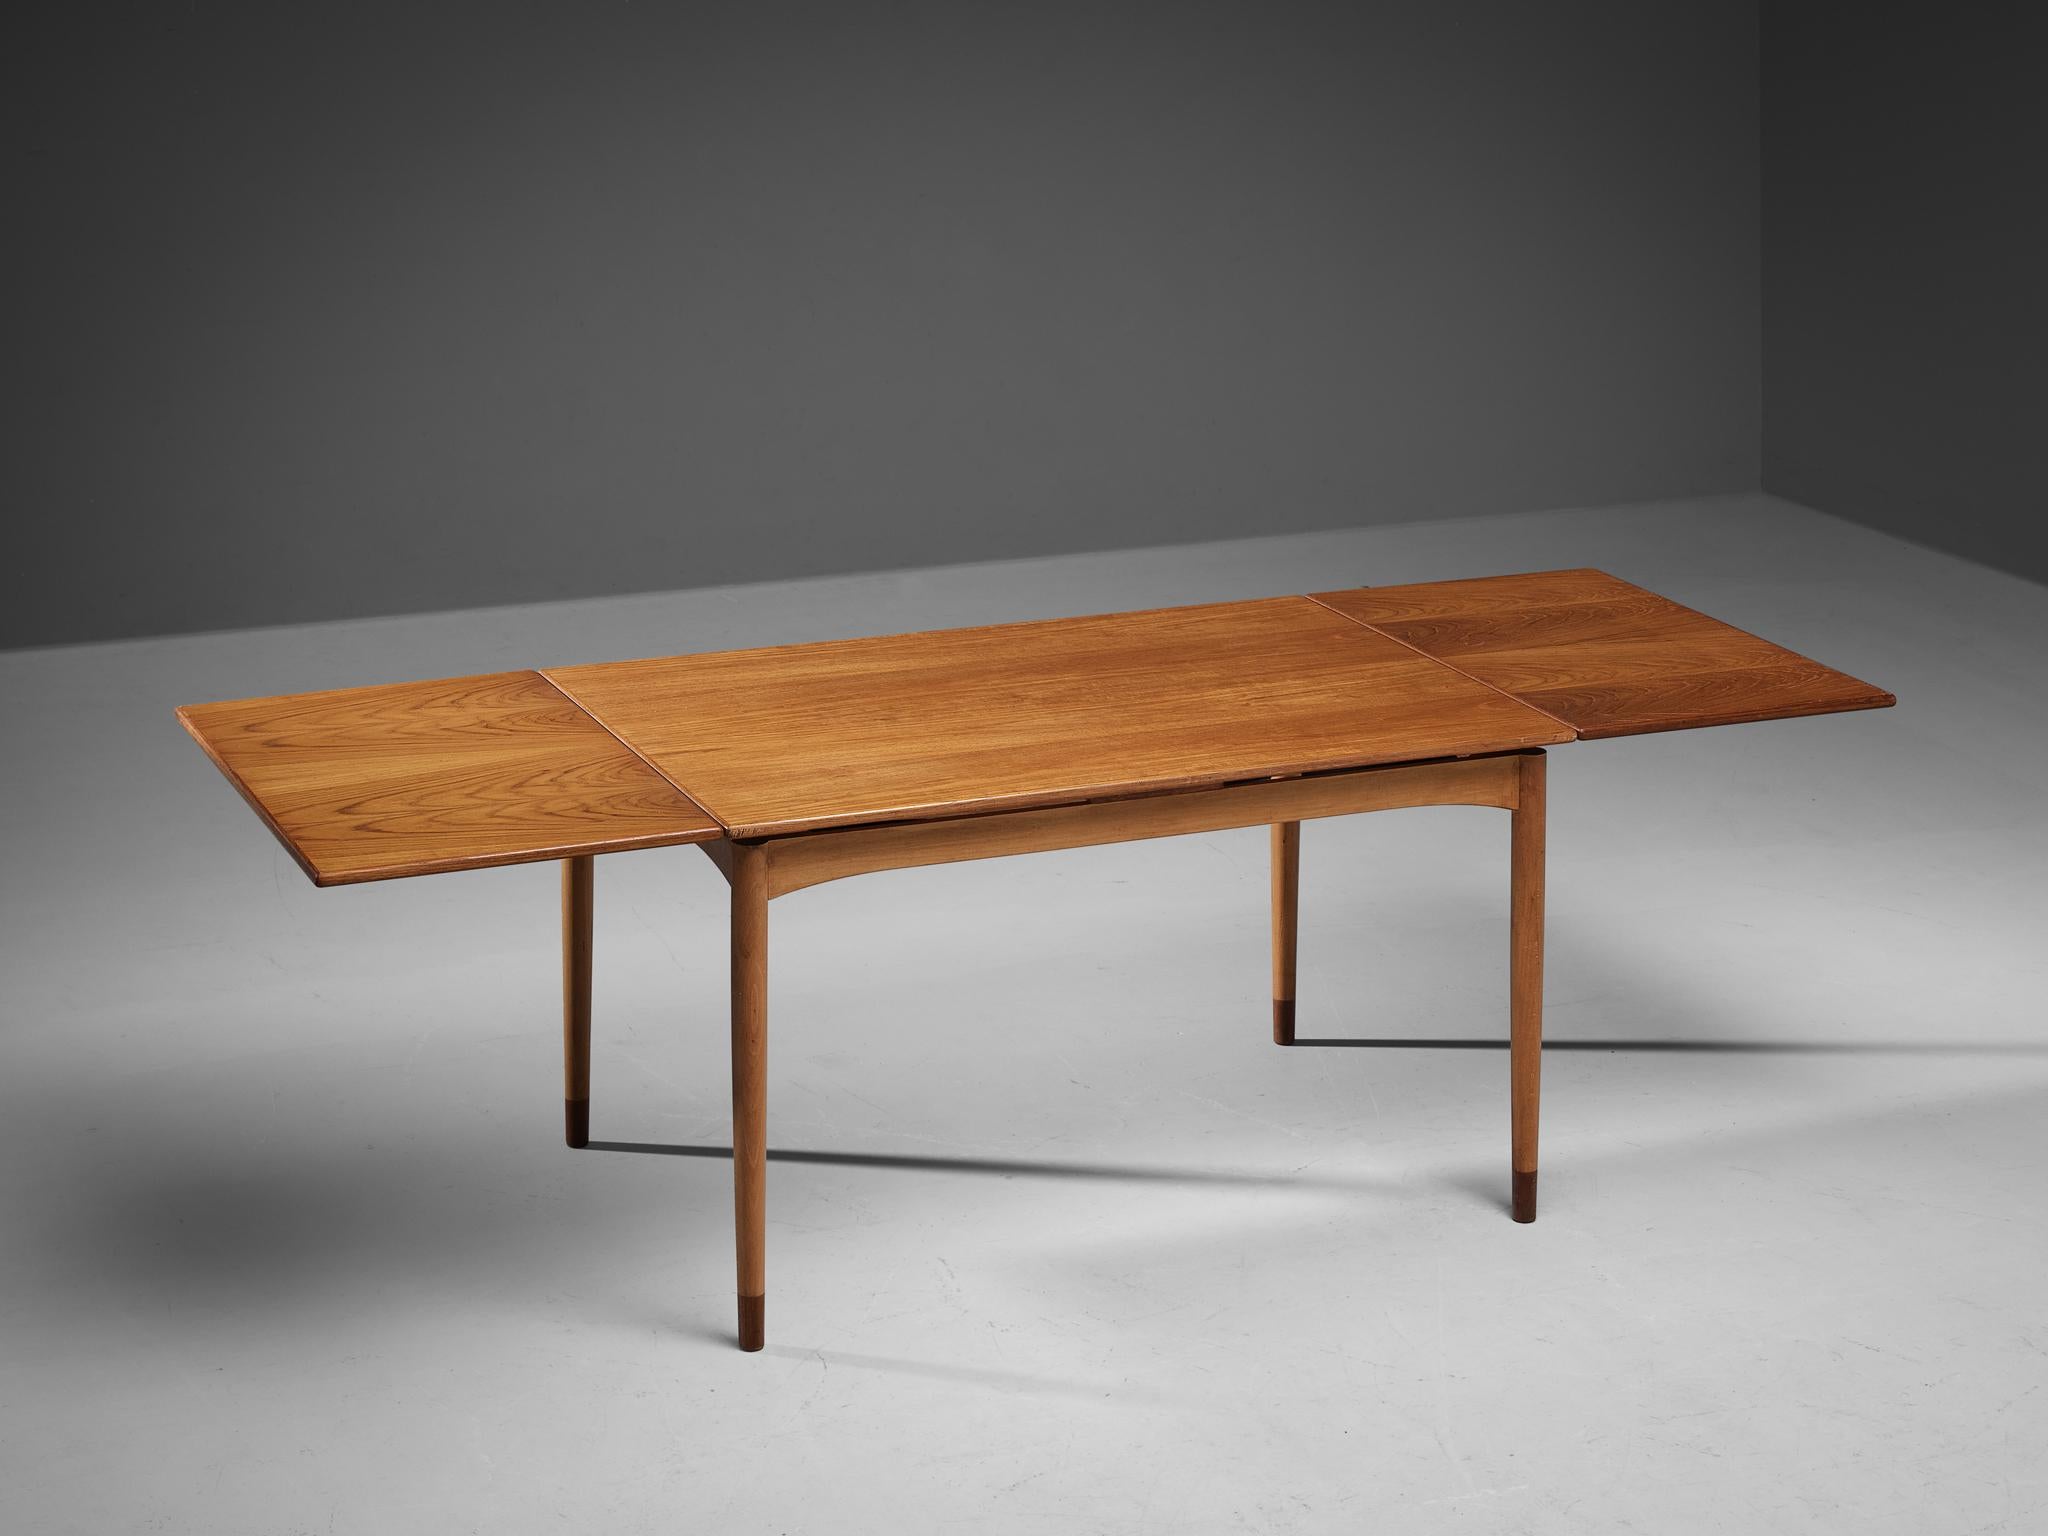 Børge Mogensen for Søborg Møbelfabrik, extendable dining table, model 153, teak, Denmark, 1952. 

This extendable dining table is characterized by a strong and solid construction executed in teak. This is realized by the sharp and clear lines which